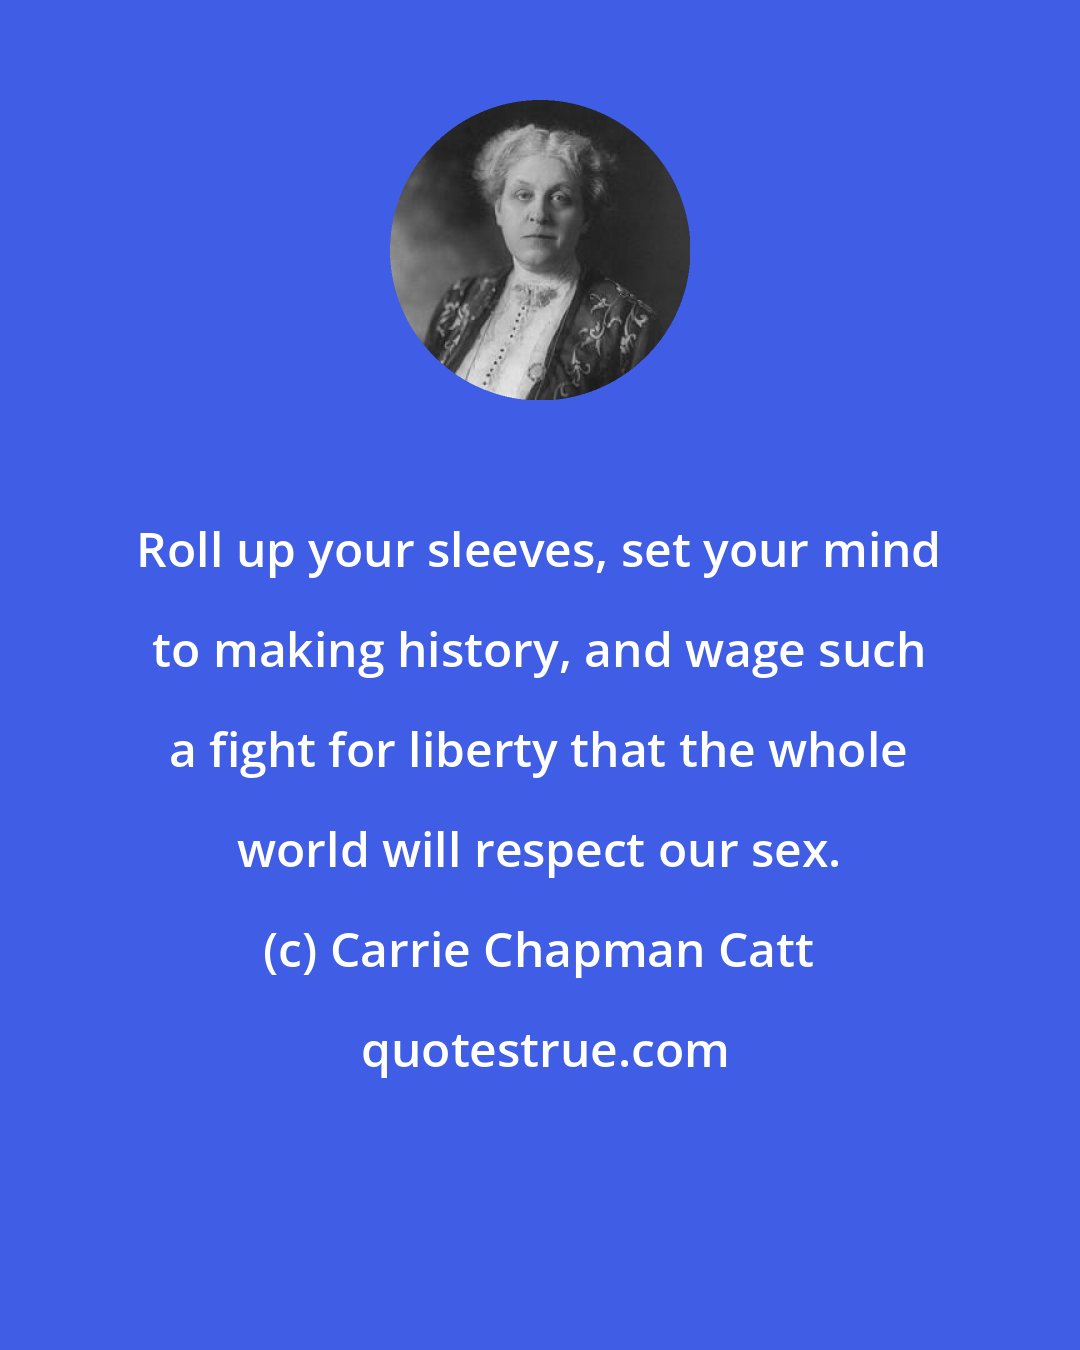 Carrie Chapman Catt: Roll up your sleeves, set your mind to making history, and wage such a fight for liberty that the whole world will respect our sex.